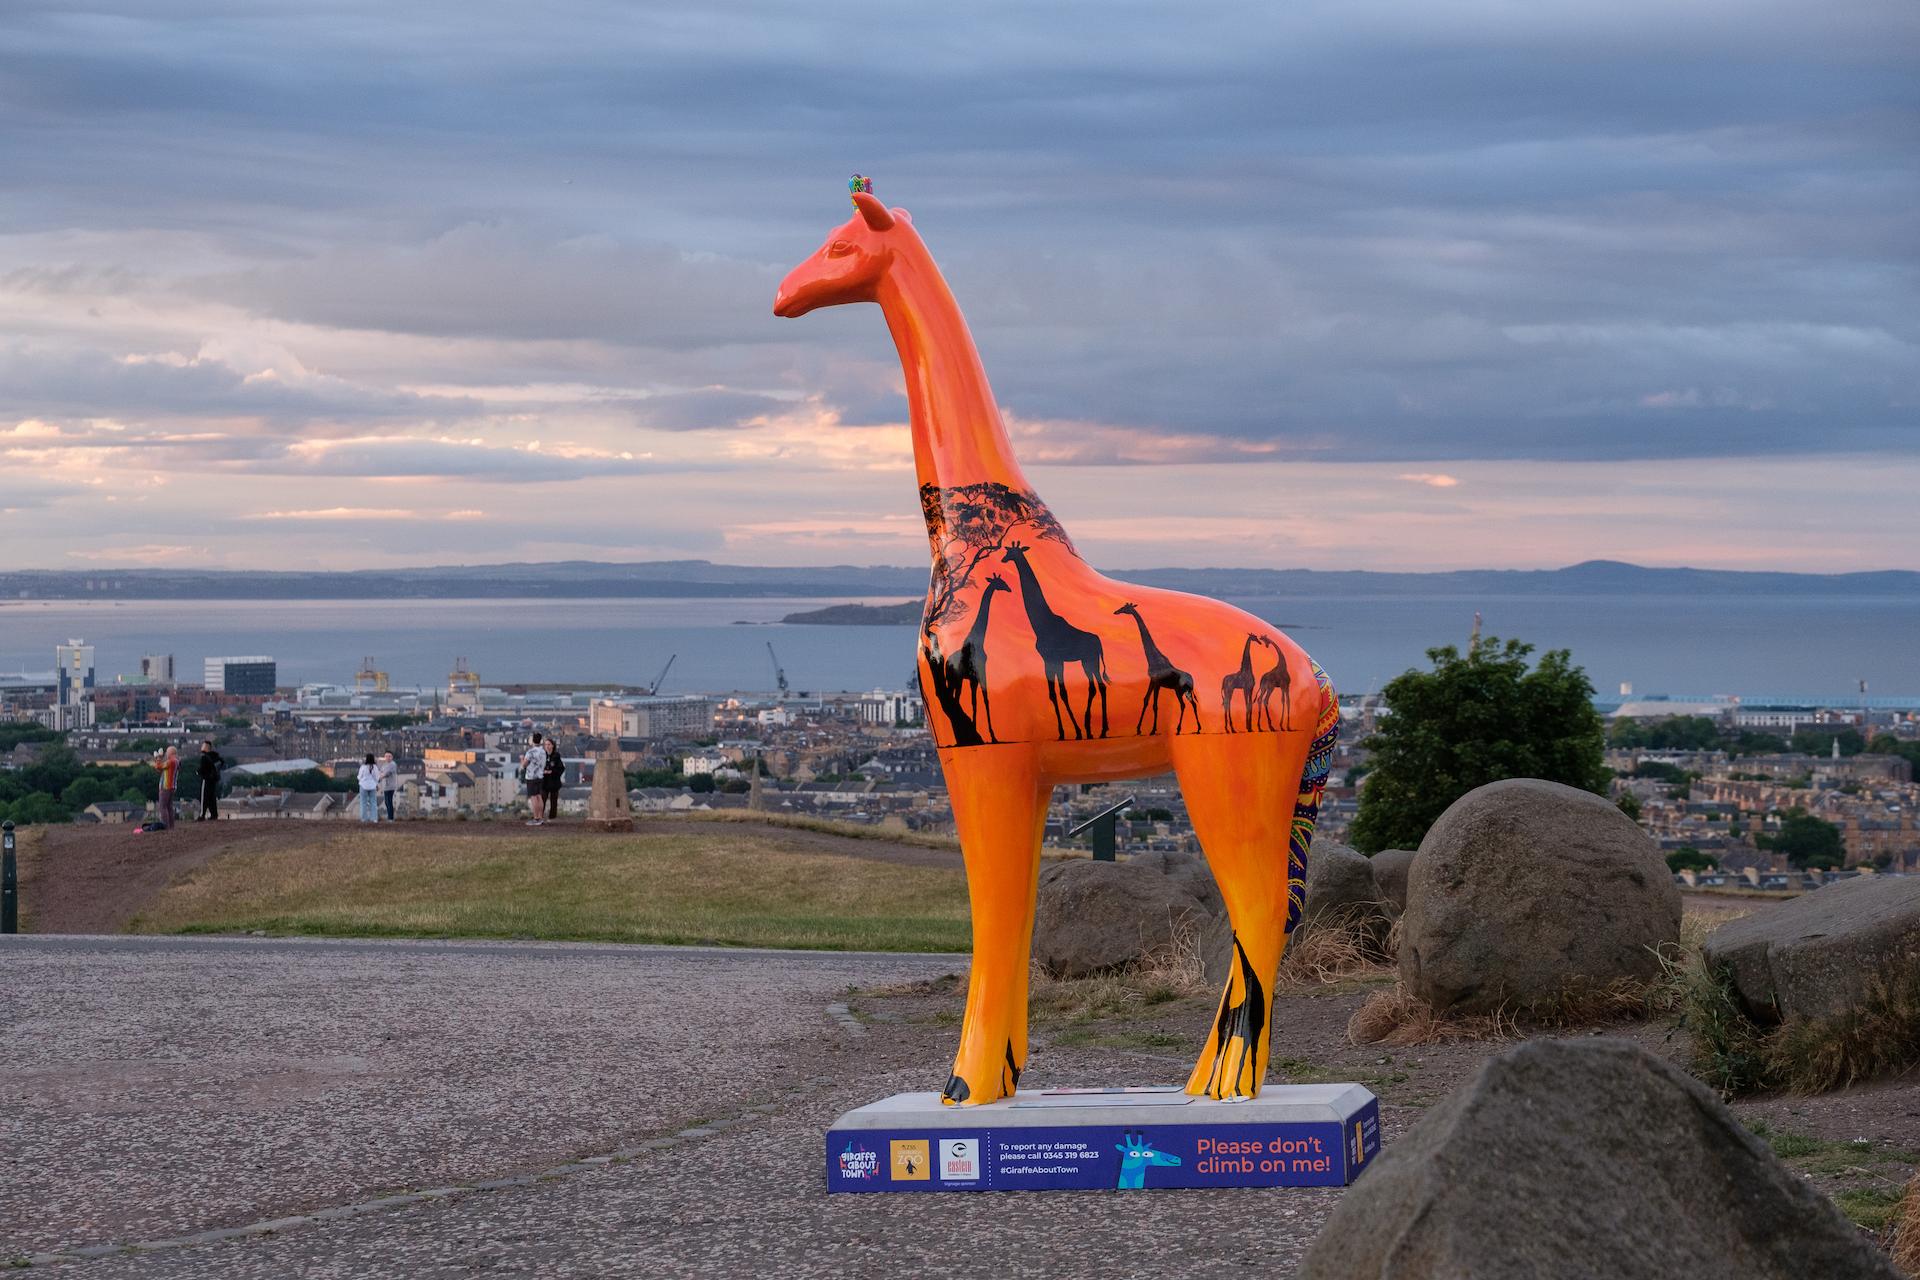 Giraffe about town statue, orange with black silhouette giraffes, with cityscape behind